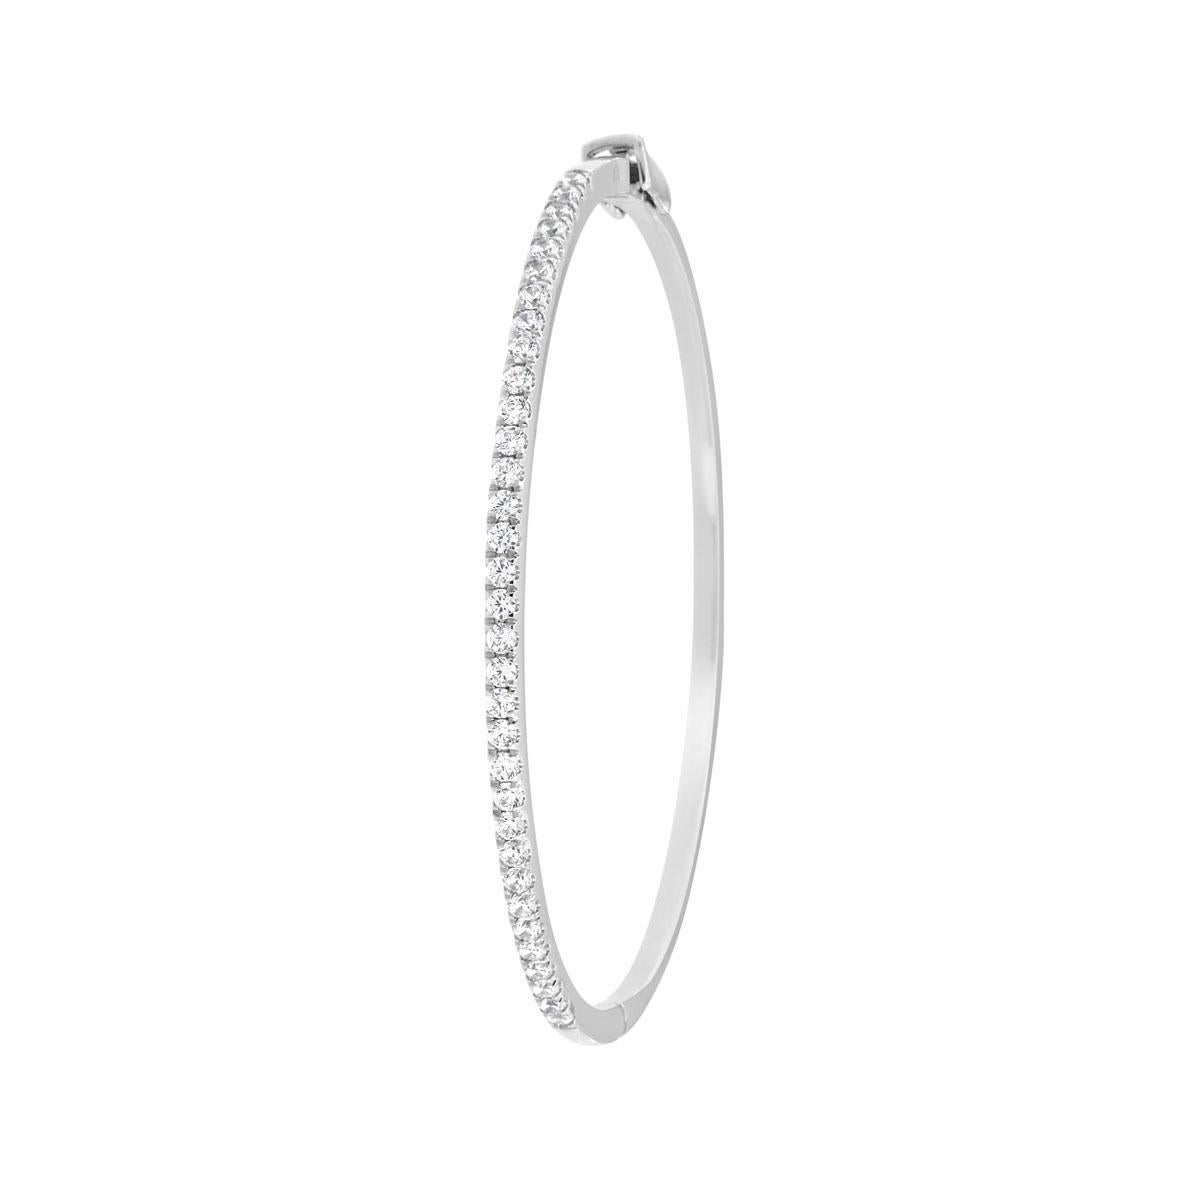 This classic bangle features round brilliant diamonds micro-prong -set for maximum brilliance. Experience the difference!

Product details: 

Center Gemstone Type: NATURAL DIAMOND
Center Gemstone Color: WHITE
Center Gemstone Shape: ROUND
Center